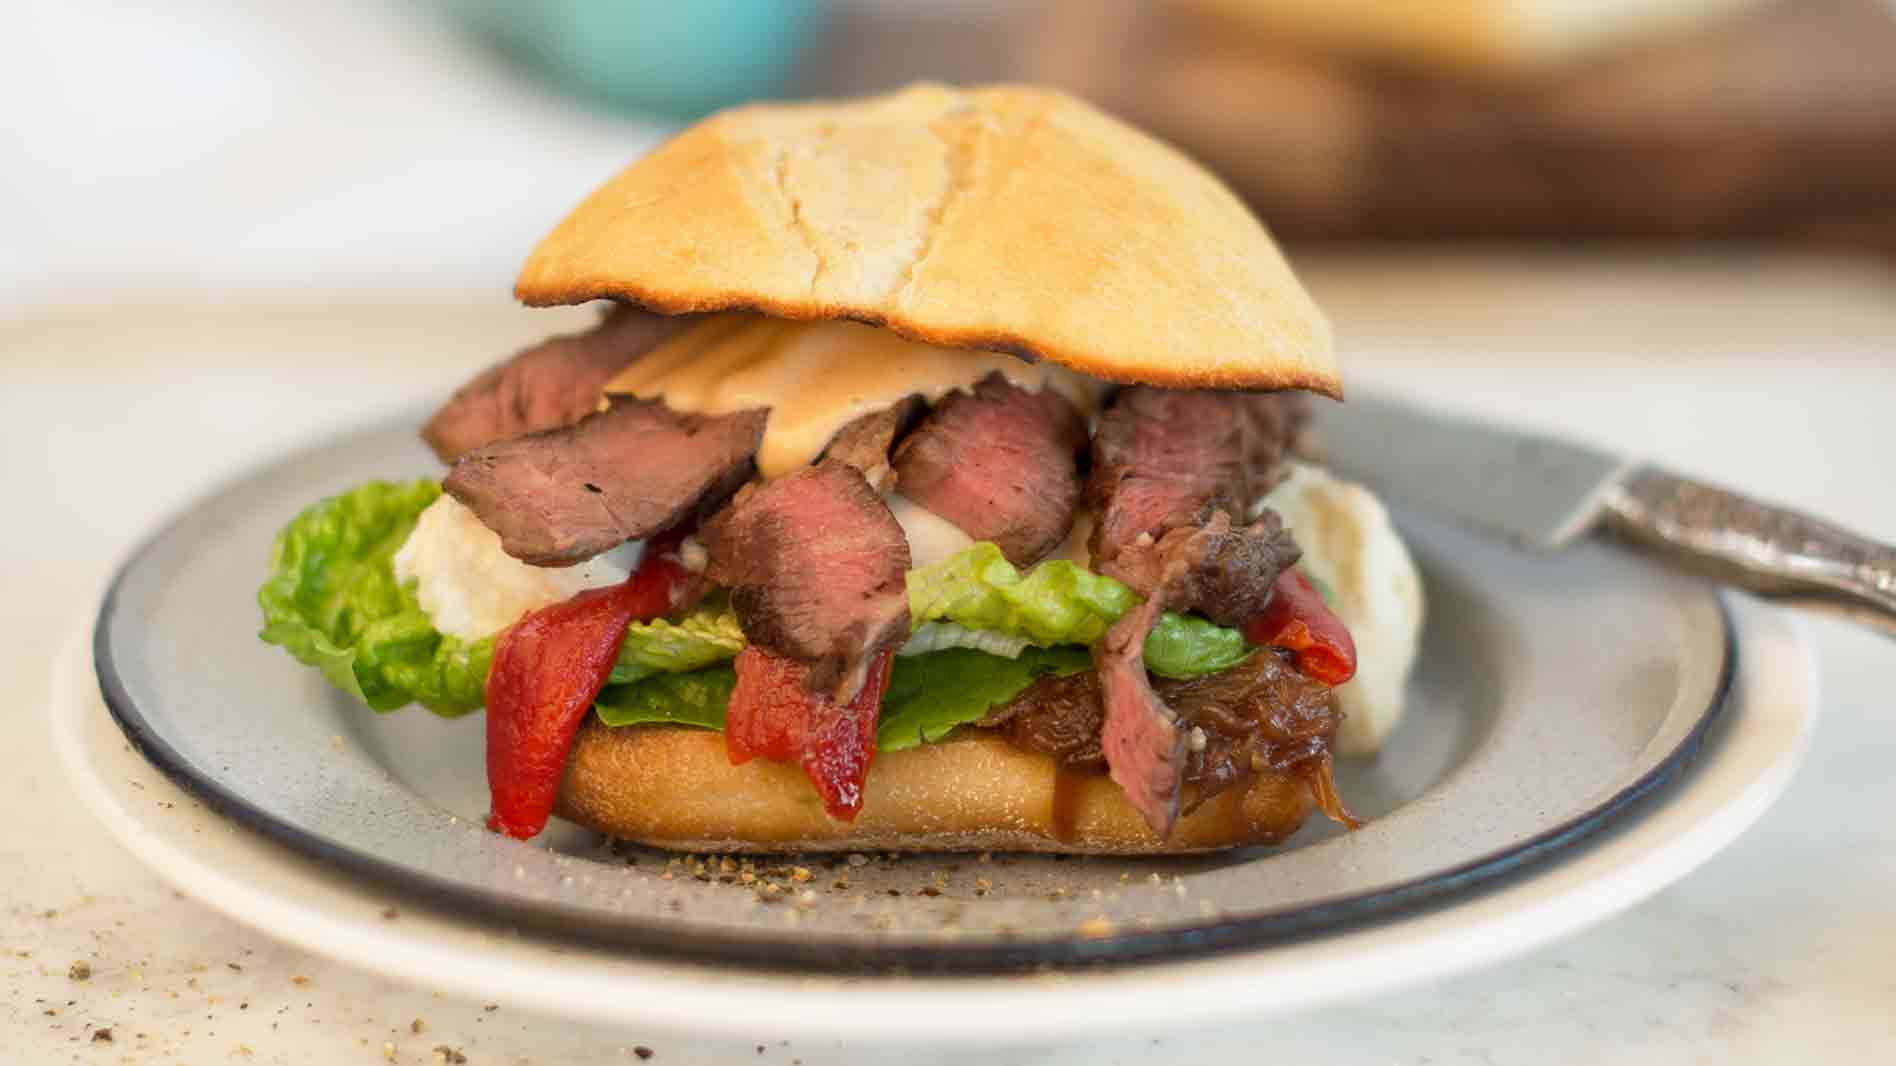 Southern Style Grilled Steak Sandwich with Chipotle Mayo